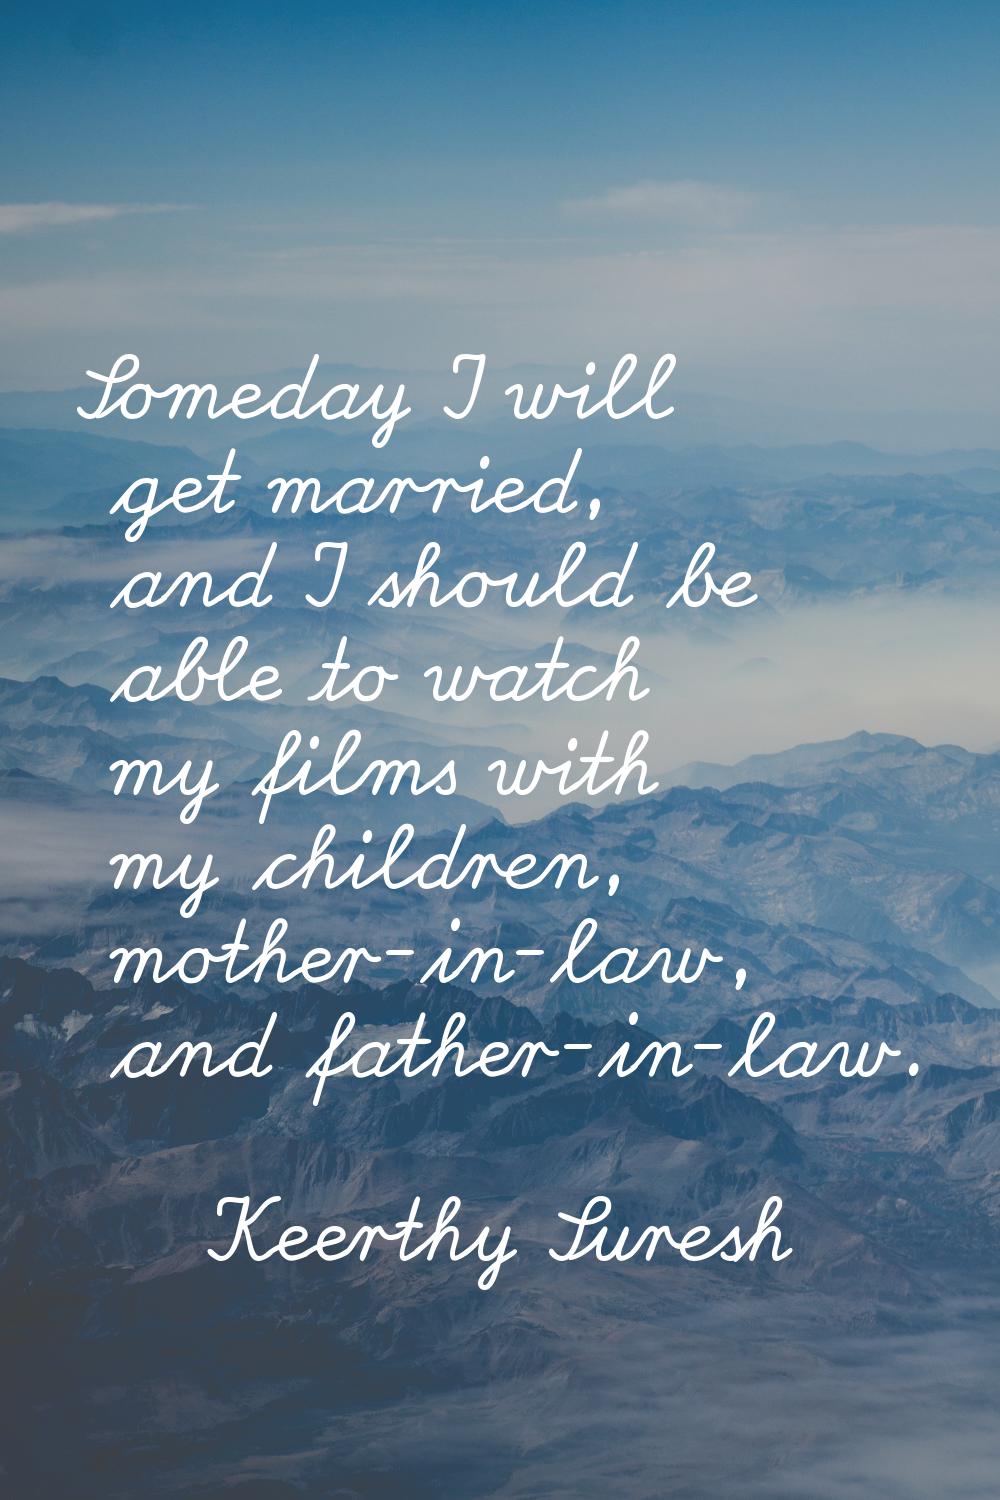 Someday I will get married, and I should be able to watch my films with my children, mother-in-law,